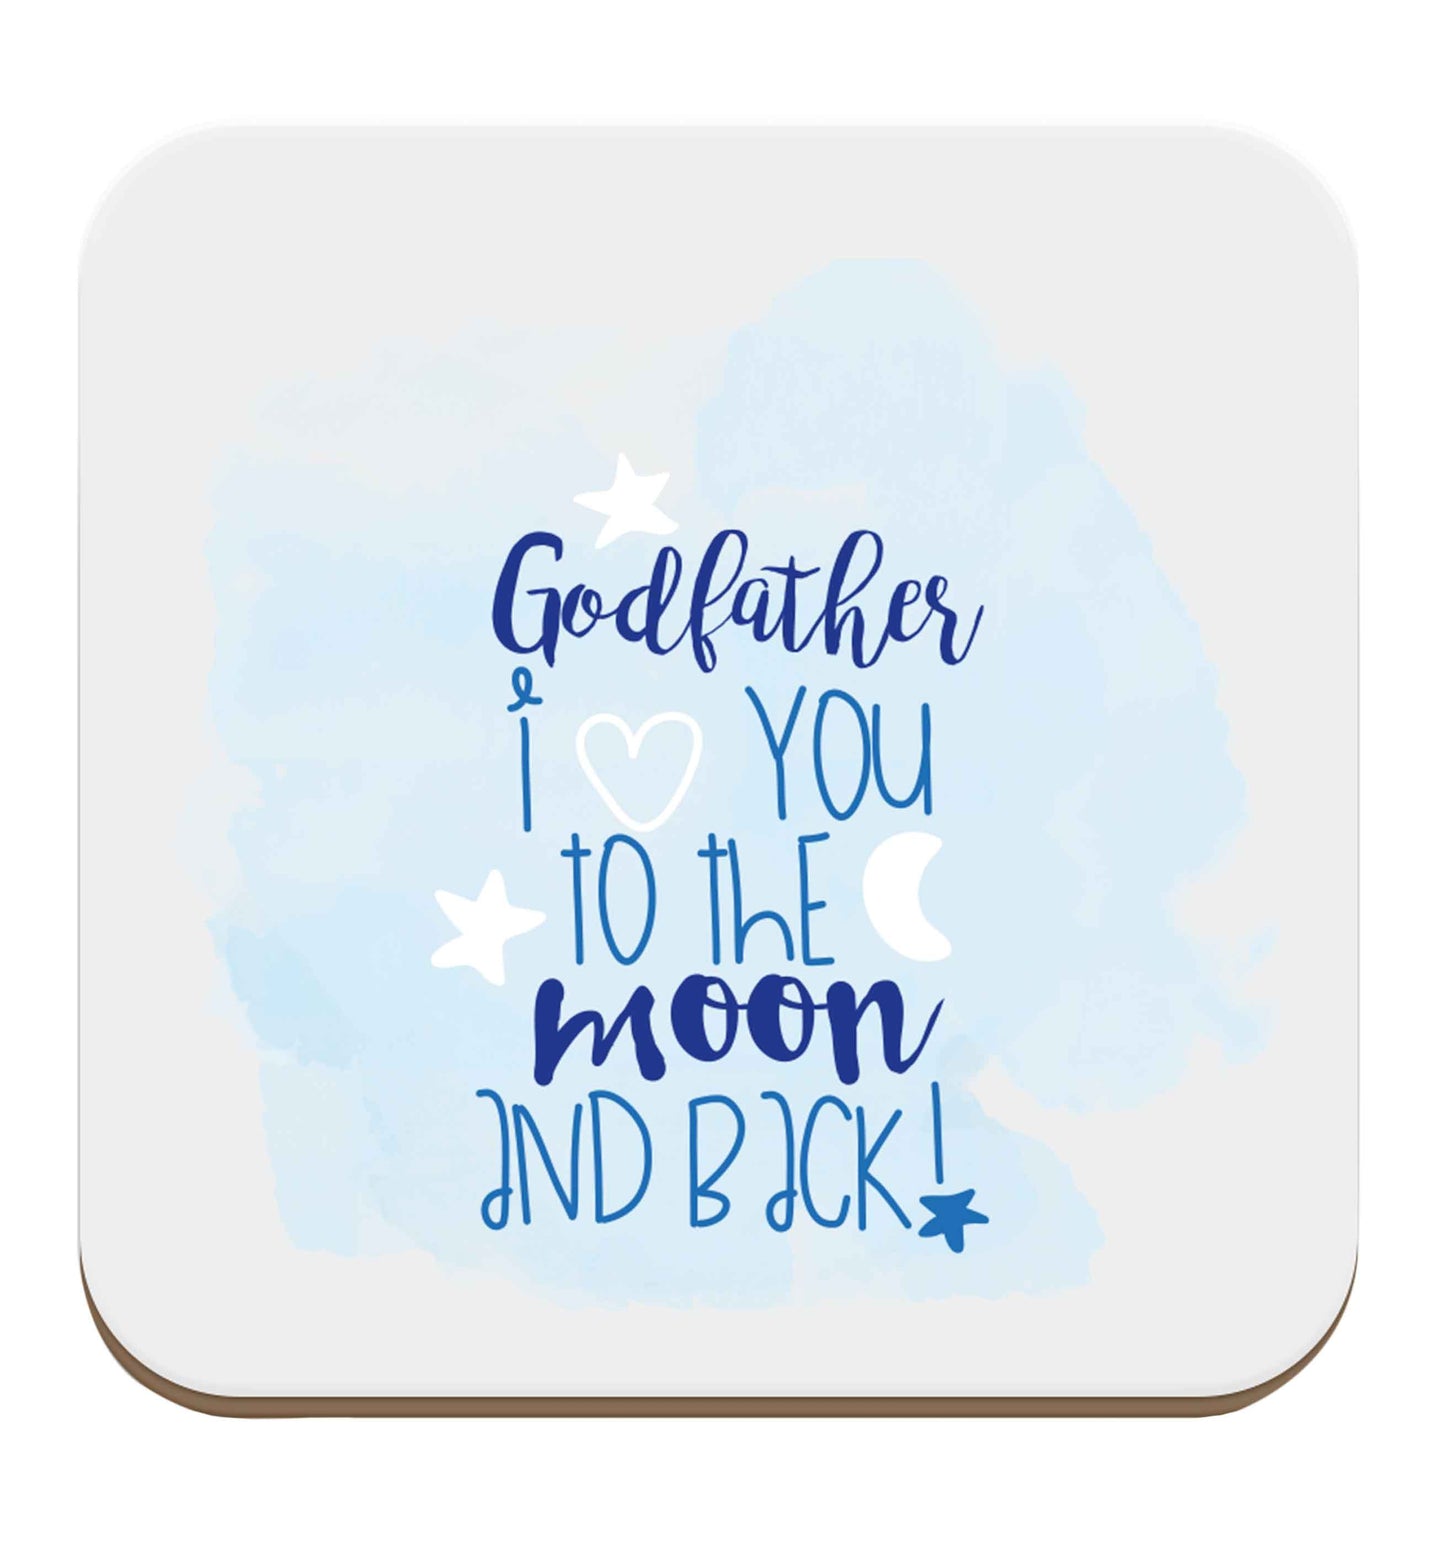 Godfather I love you to the moon and back set of four coasters